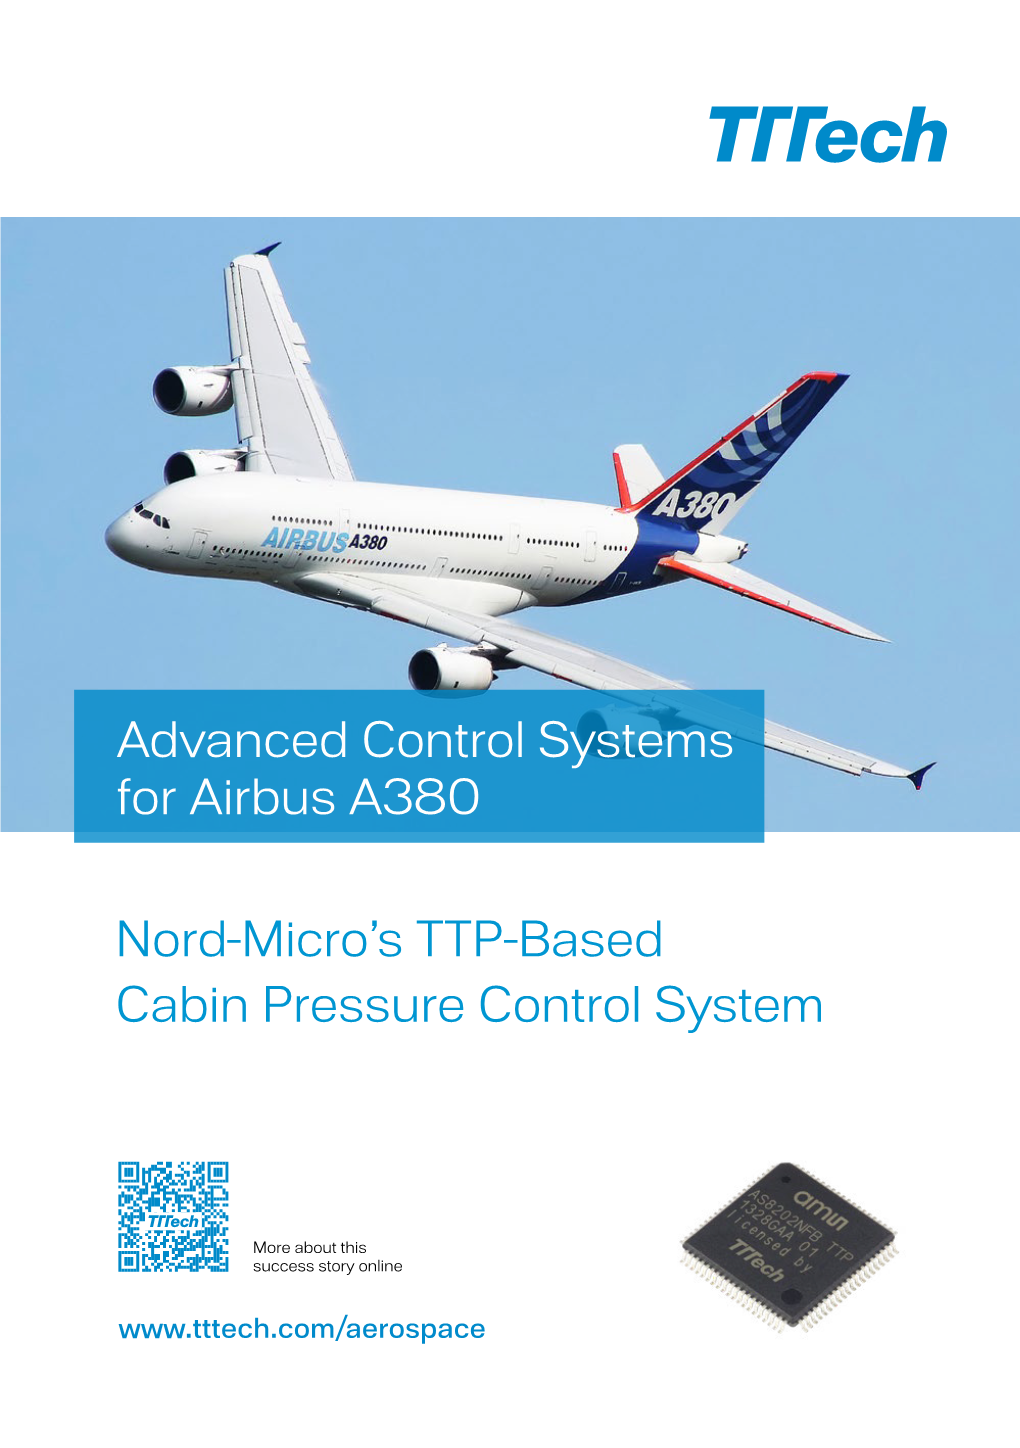 Nord-Micro's TTP-Based Cabin Pressure Control System